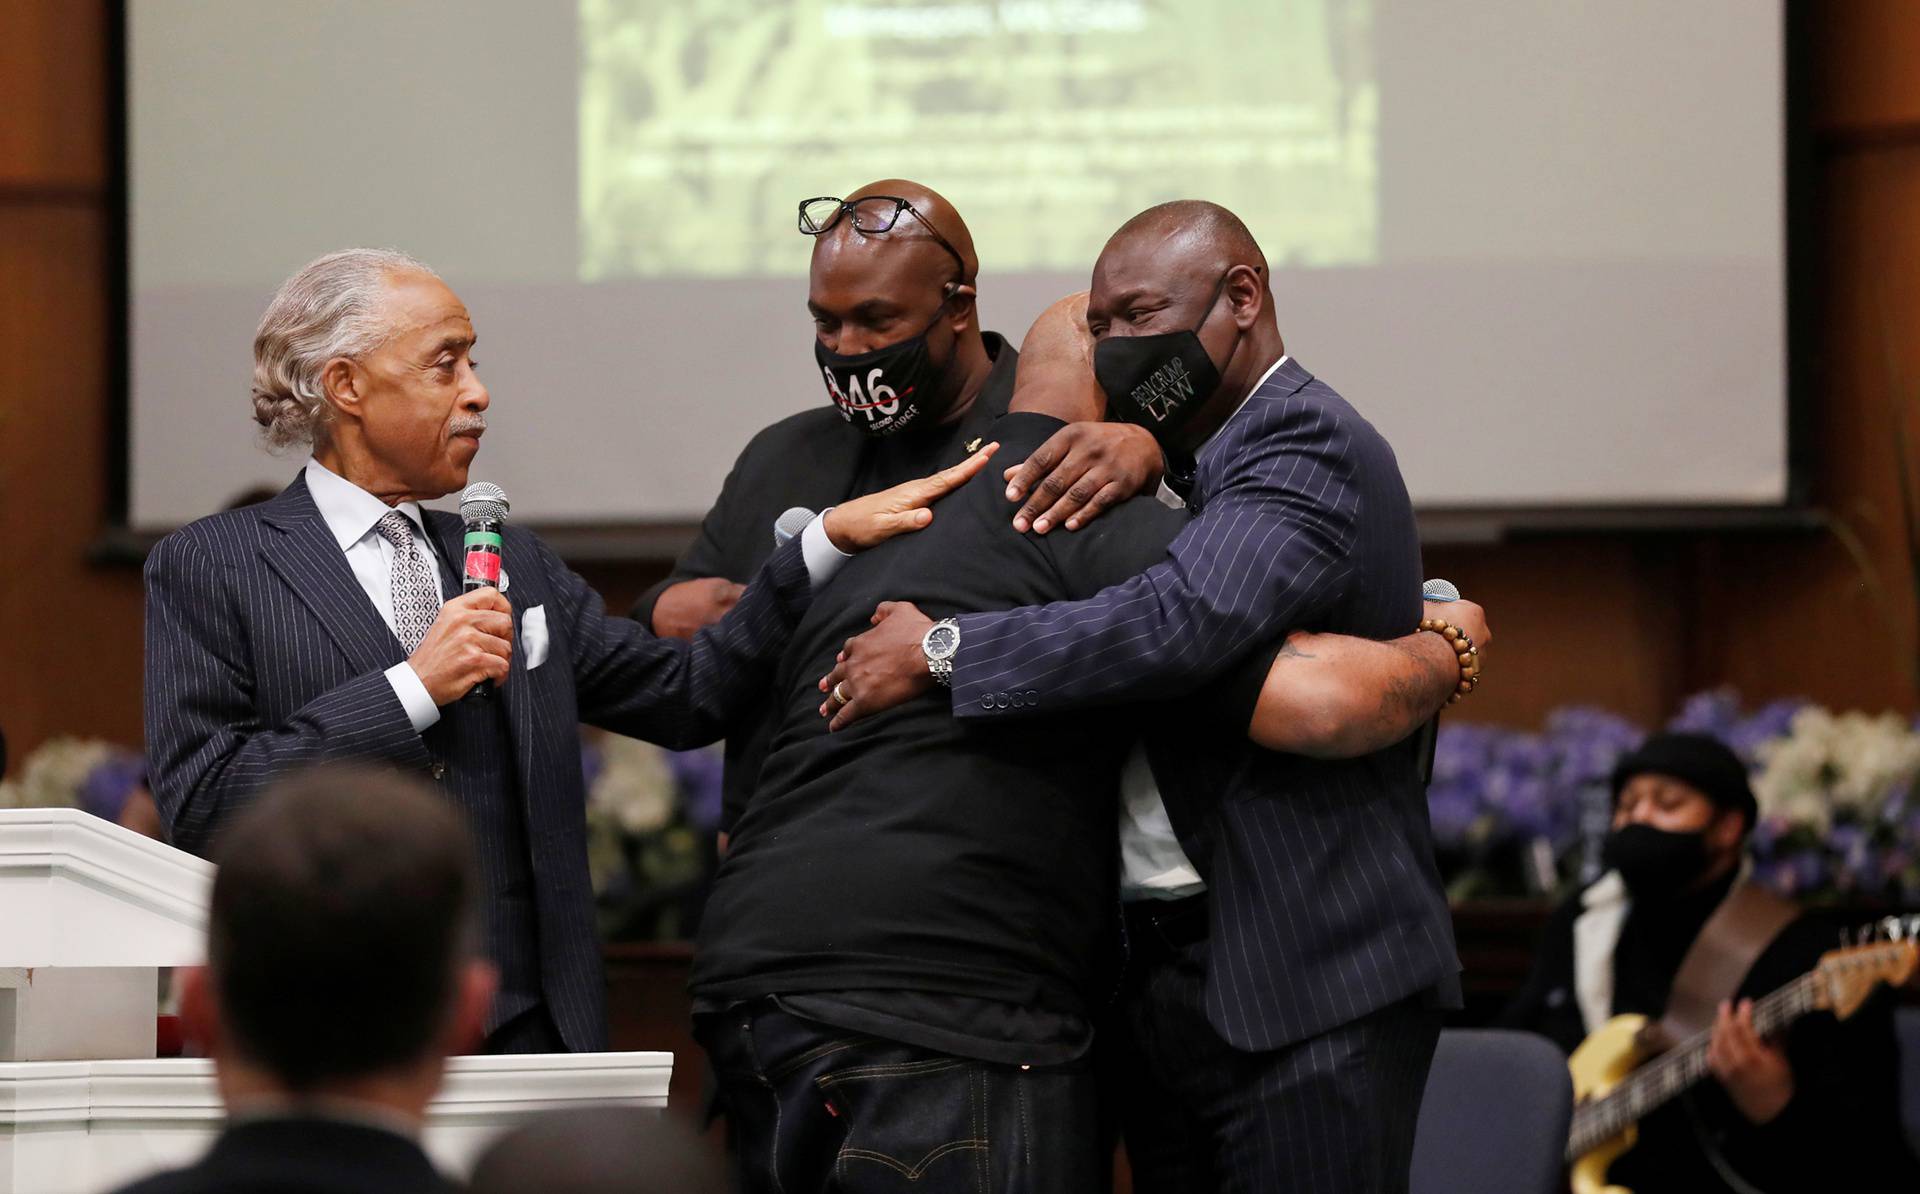 Terrence, brother of George Floyd, is comforted by Rev. Al Sharpton, his brother Philonise, and attorney Ben Crump during a prayer vigil in Minneapolis